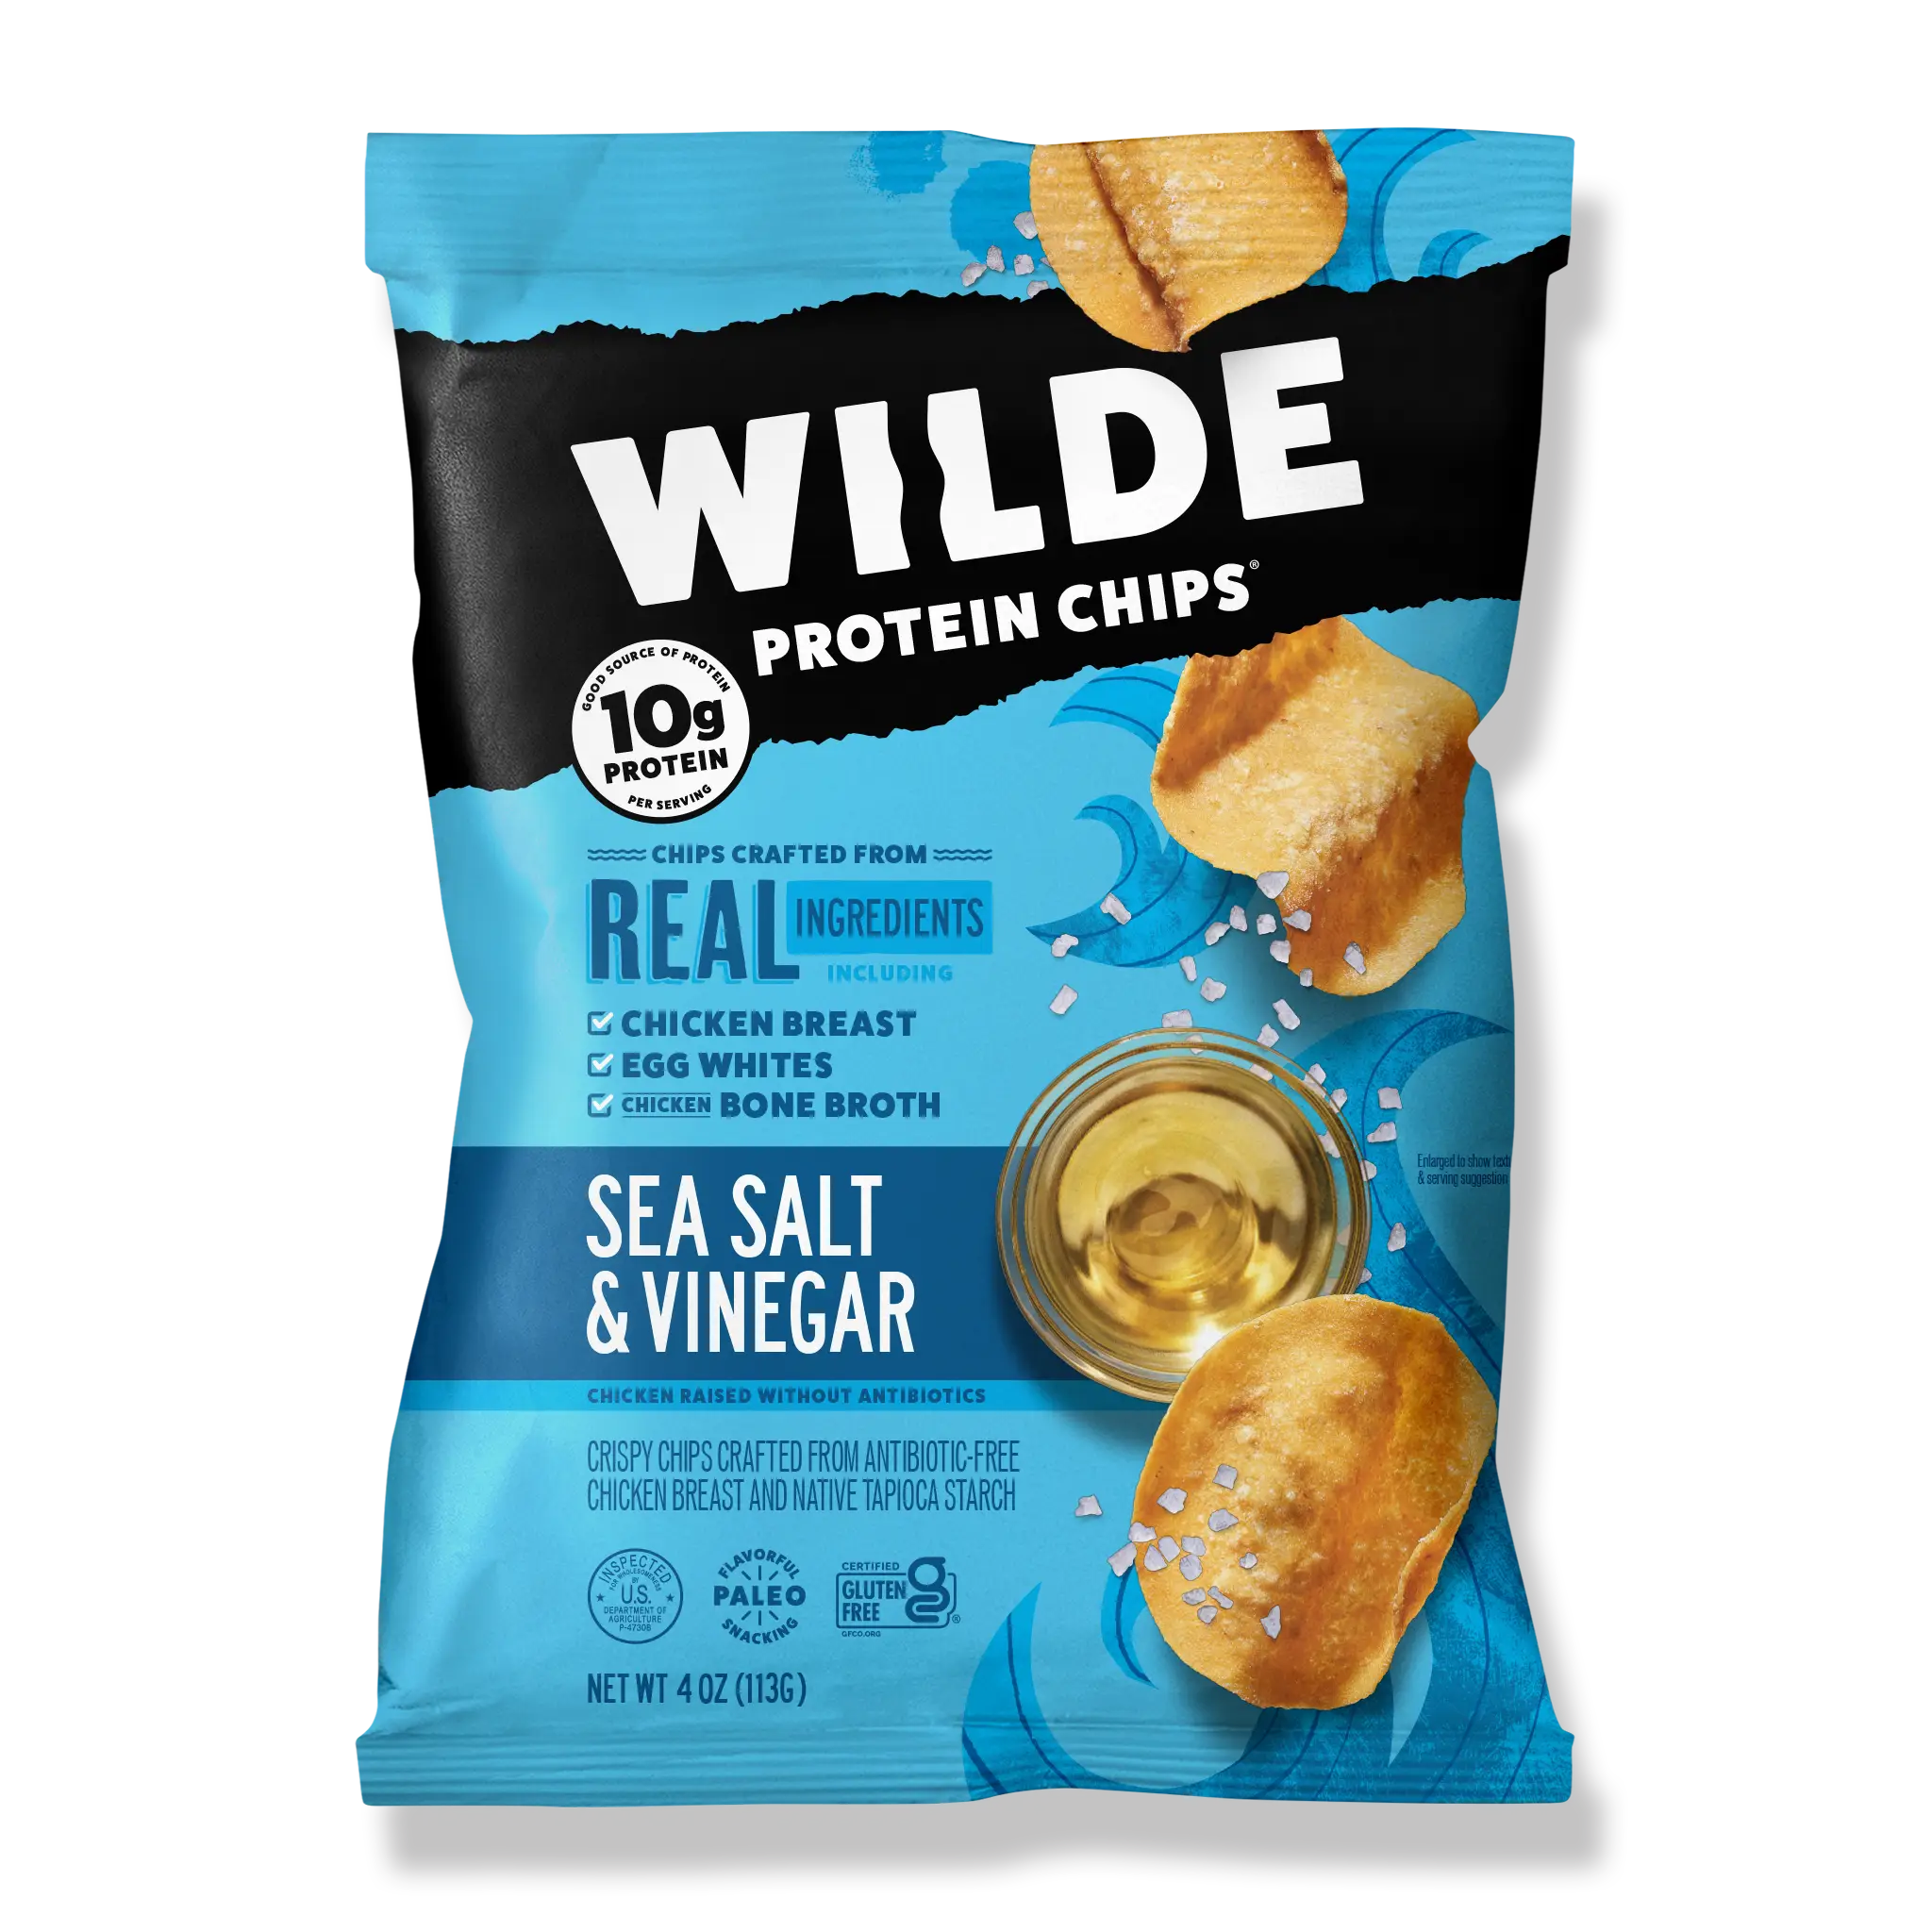 Sea Salt & Vinegar: Protein Chips Made From Real Ingredients